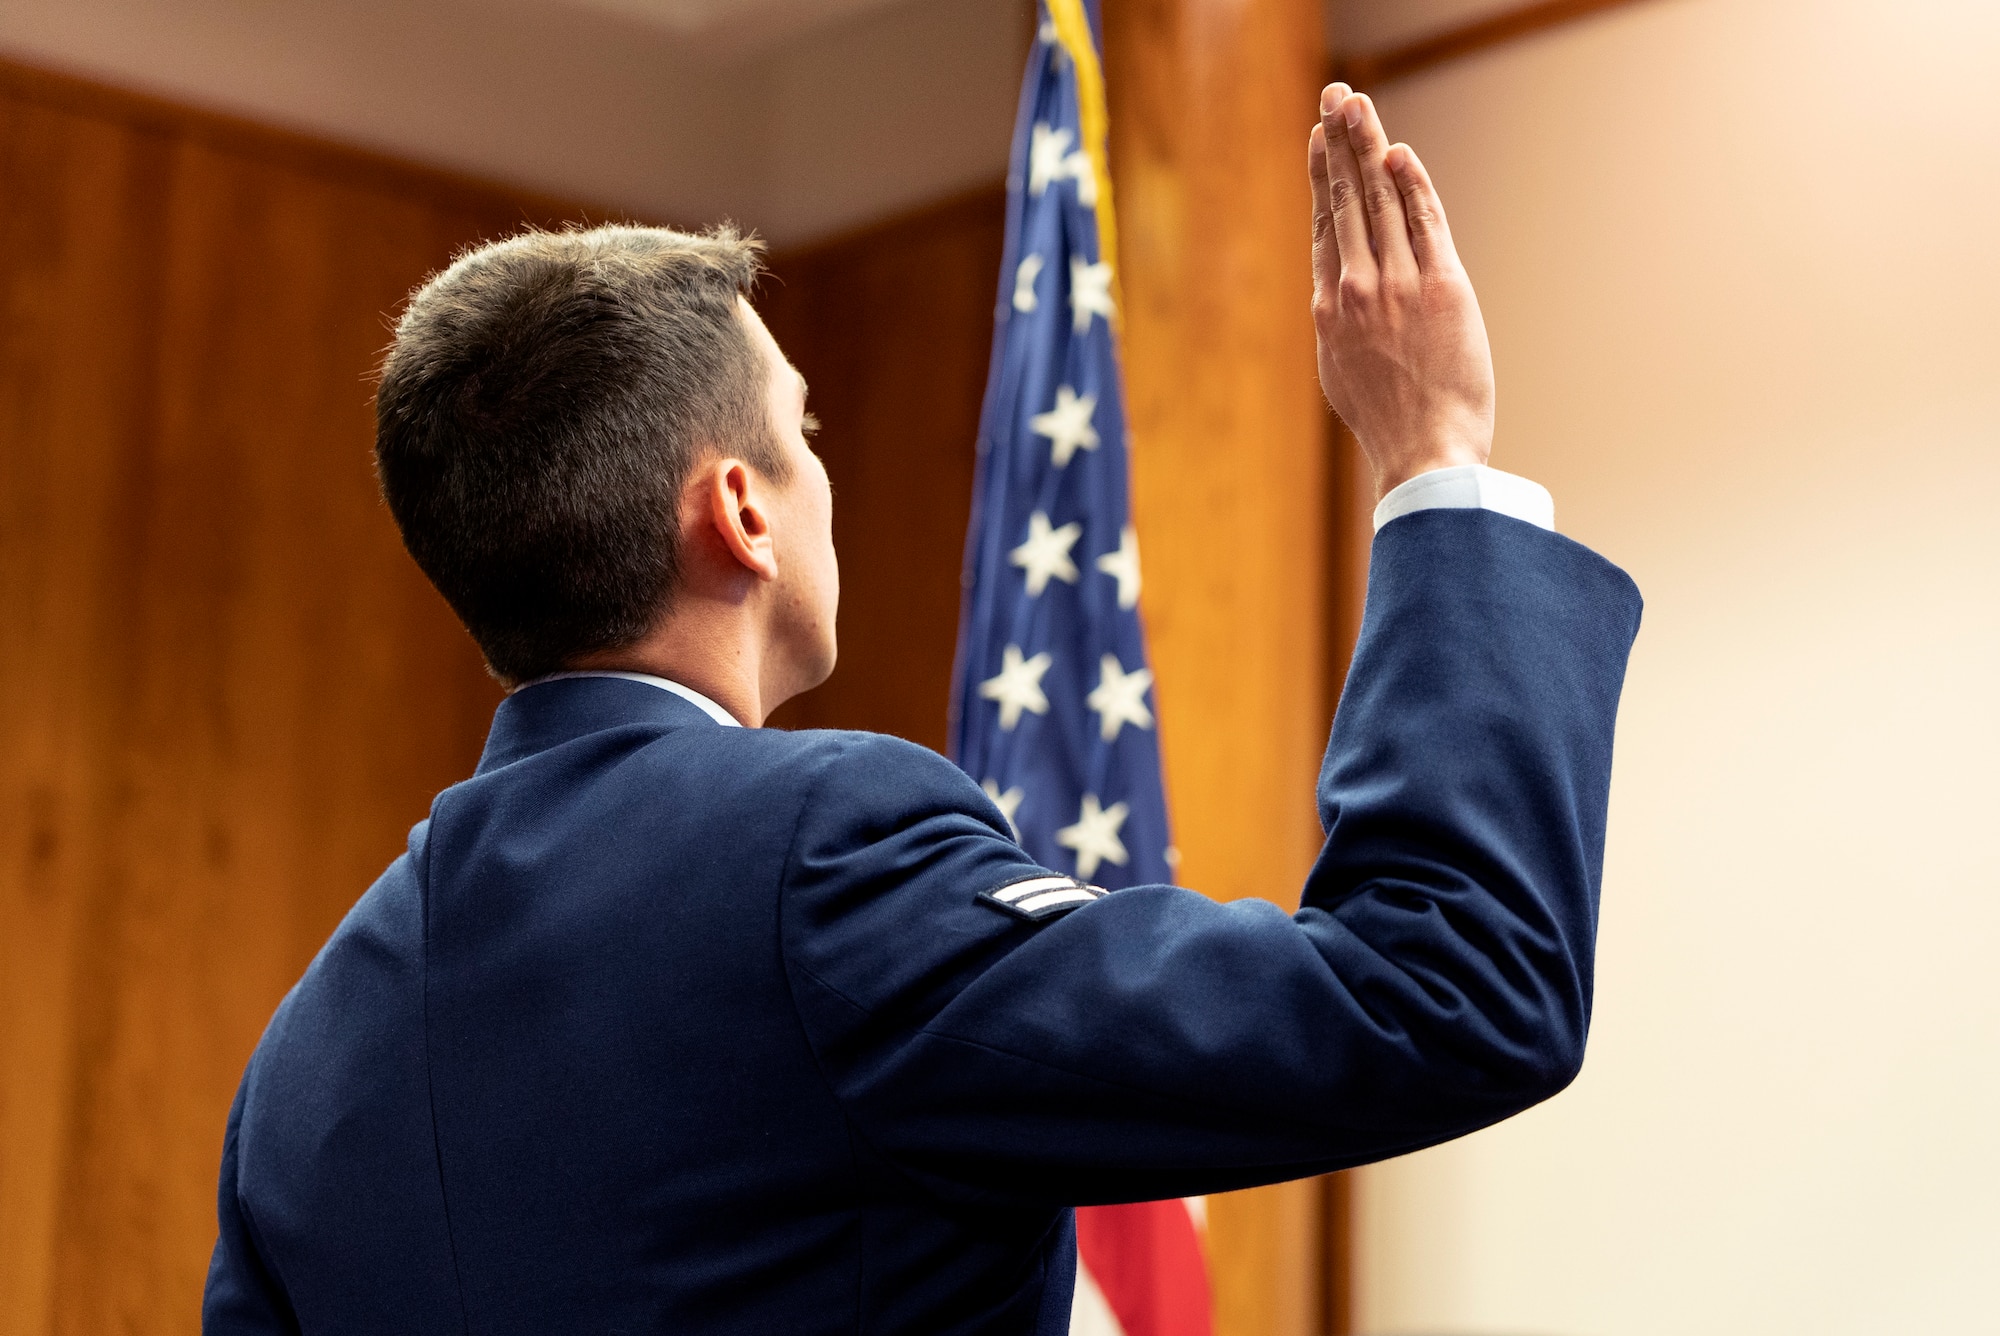 Airman 1st Class Minick stands with his right hand raised during the Oath of Allegiance.